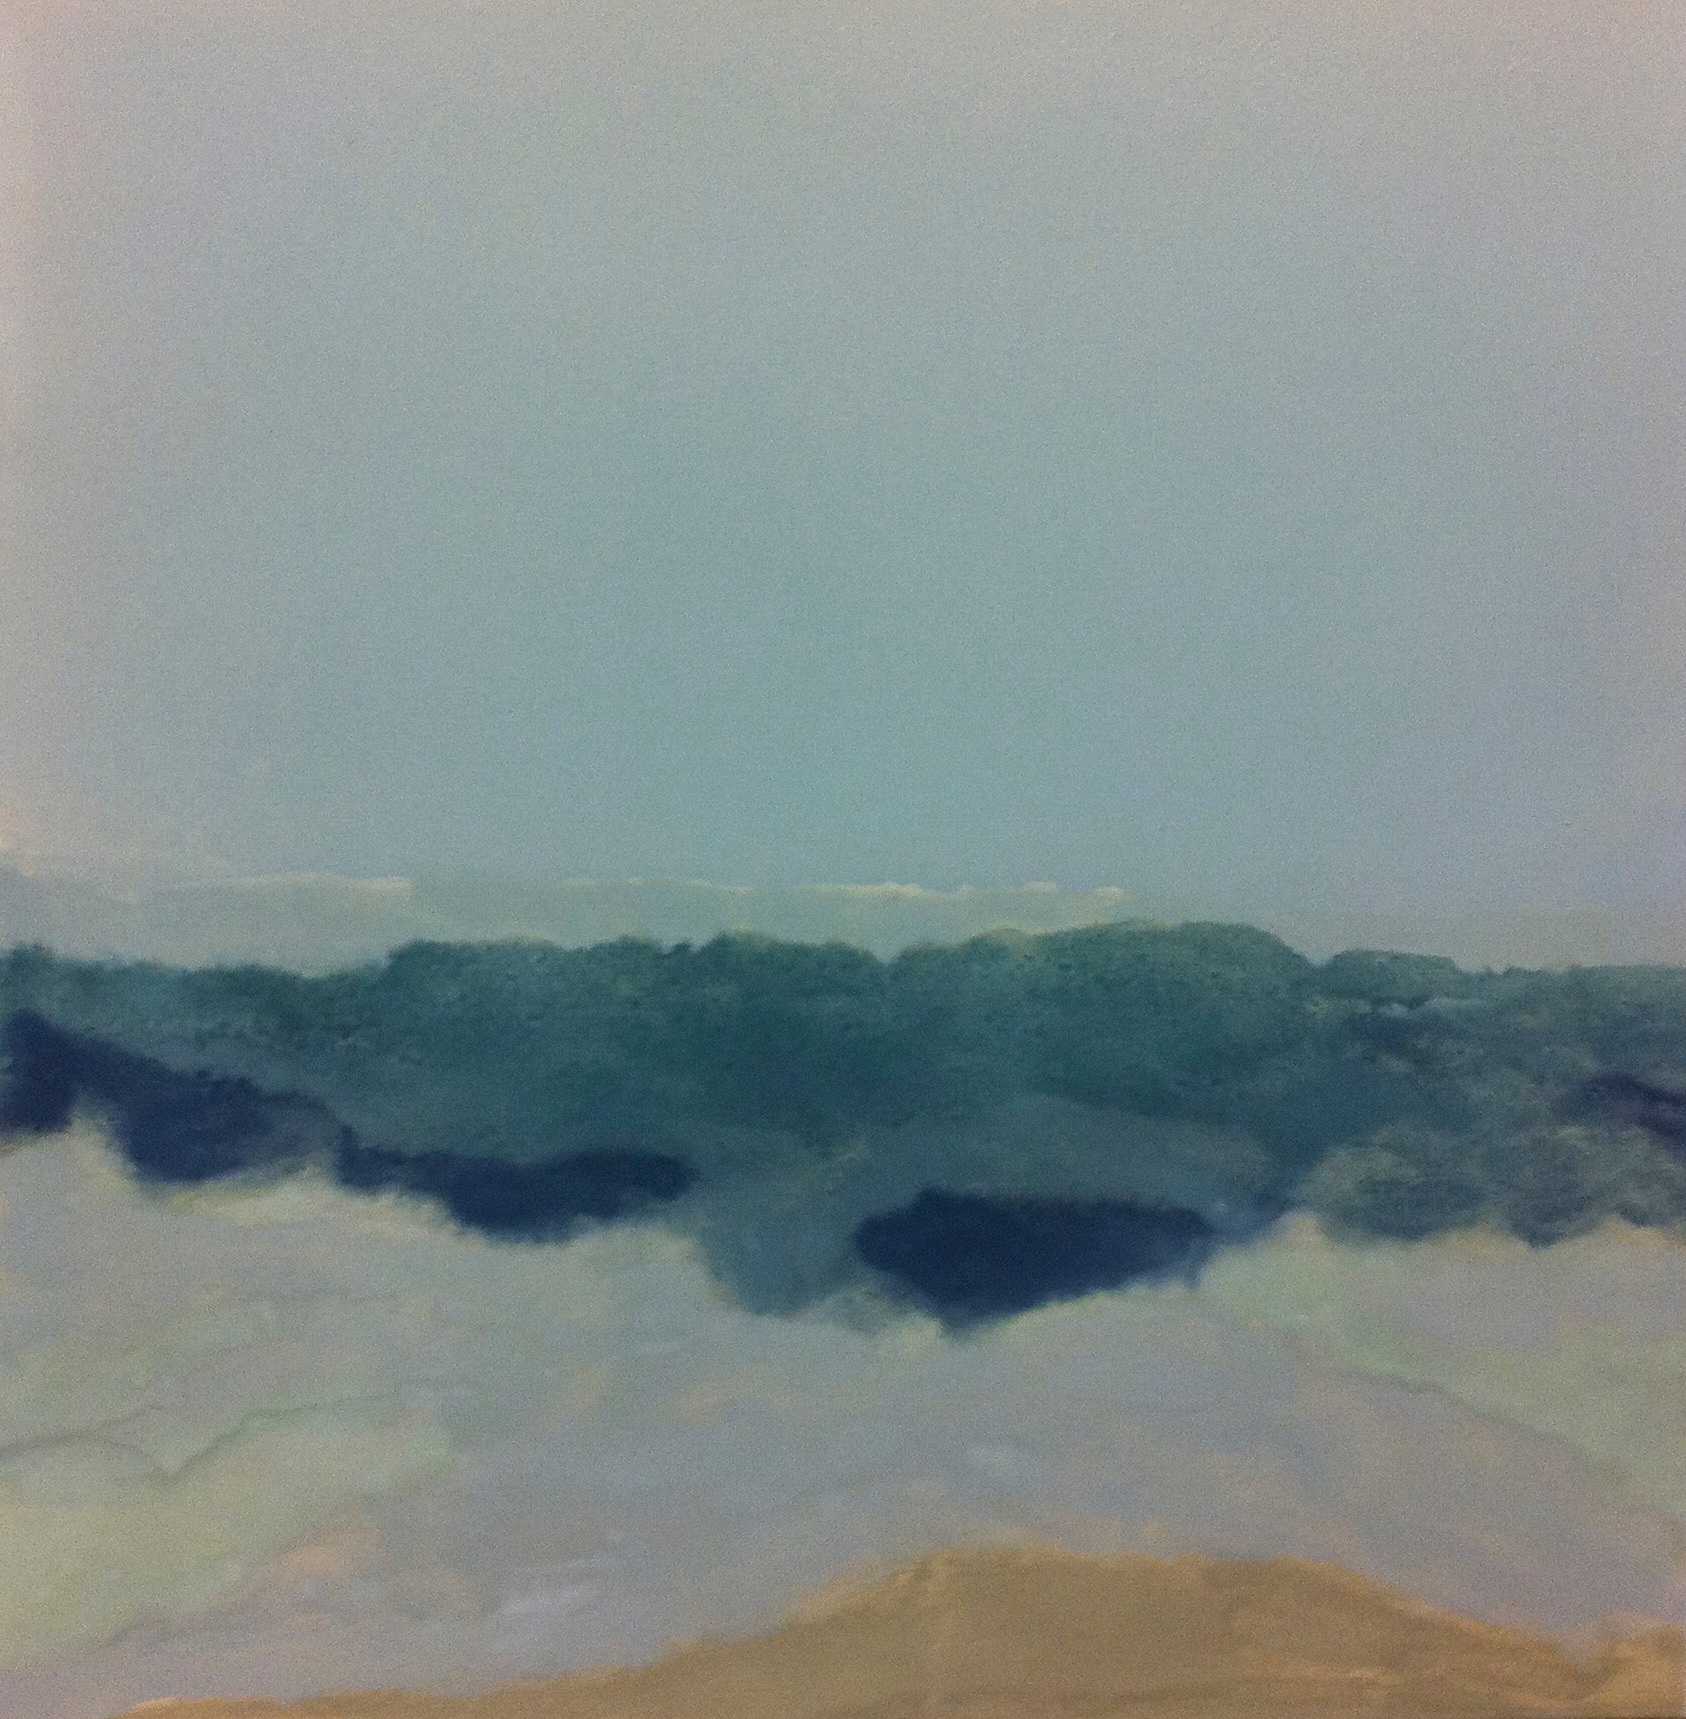  Morning at Hither Hills, Montauk, 2011. Oil on Paper, 31 x 31 inches.  Private Collection. 